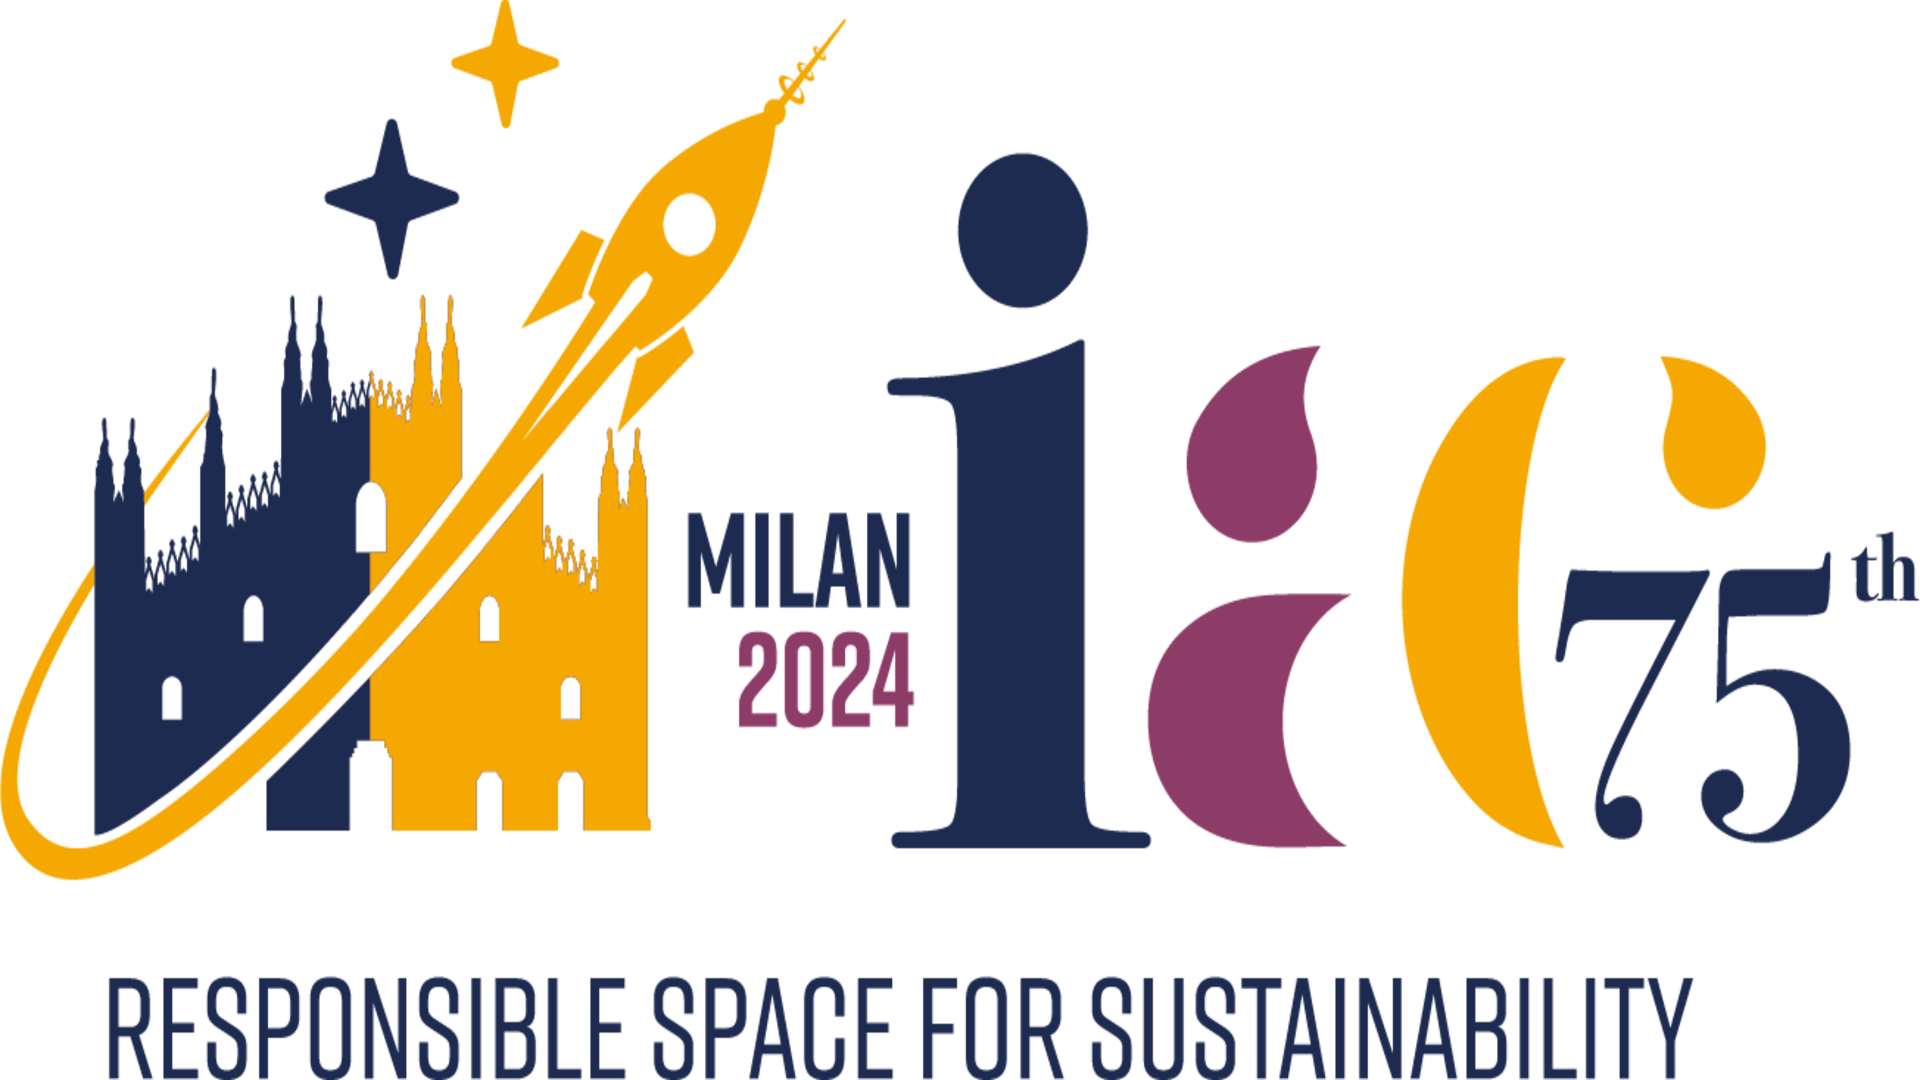 IAC 2024: THE SIGNING IN MILAN KICK-STARTS THE ORGANIZATION OF THE EVENT